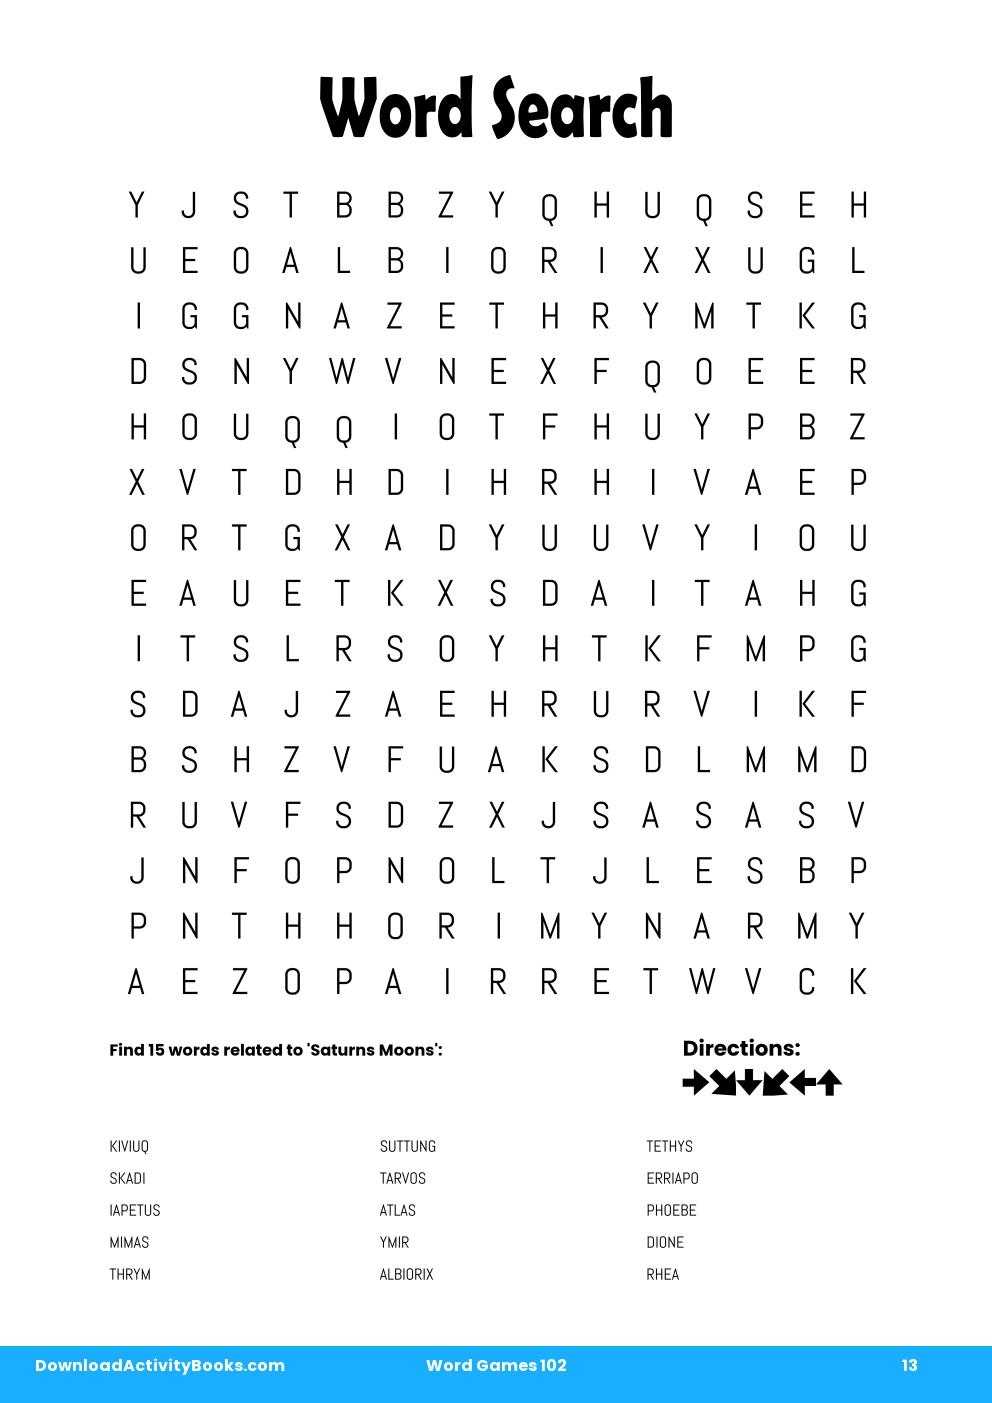 Word Search in Word Games 102